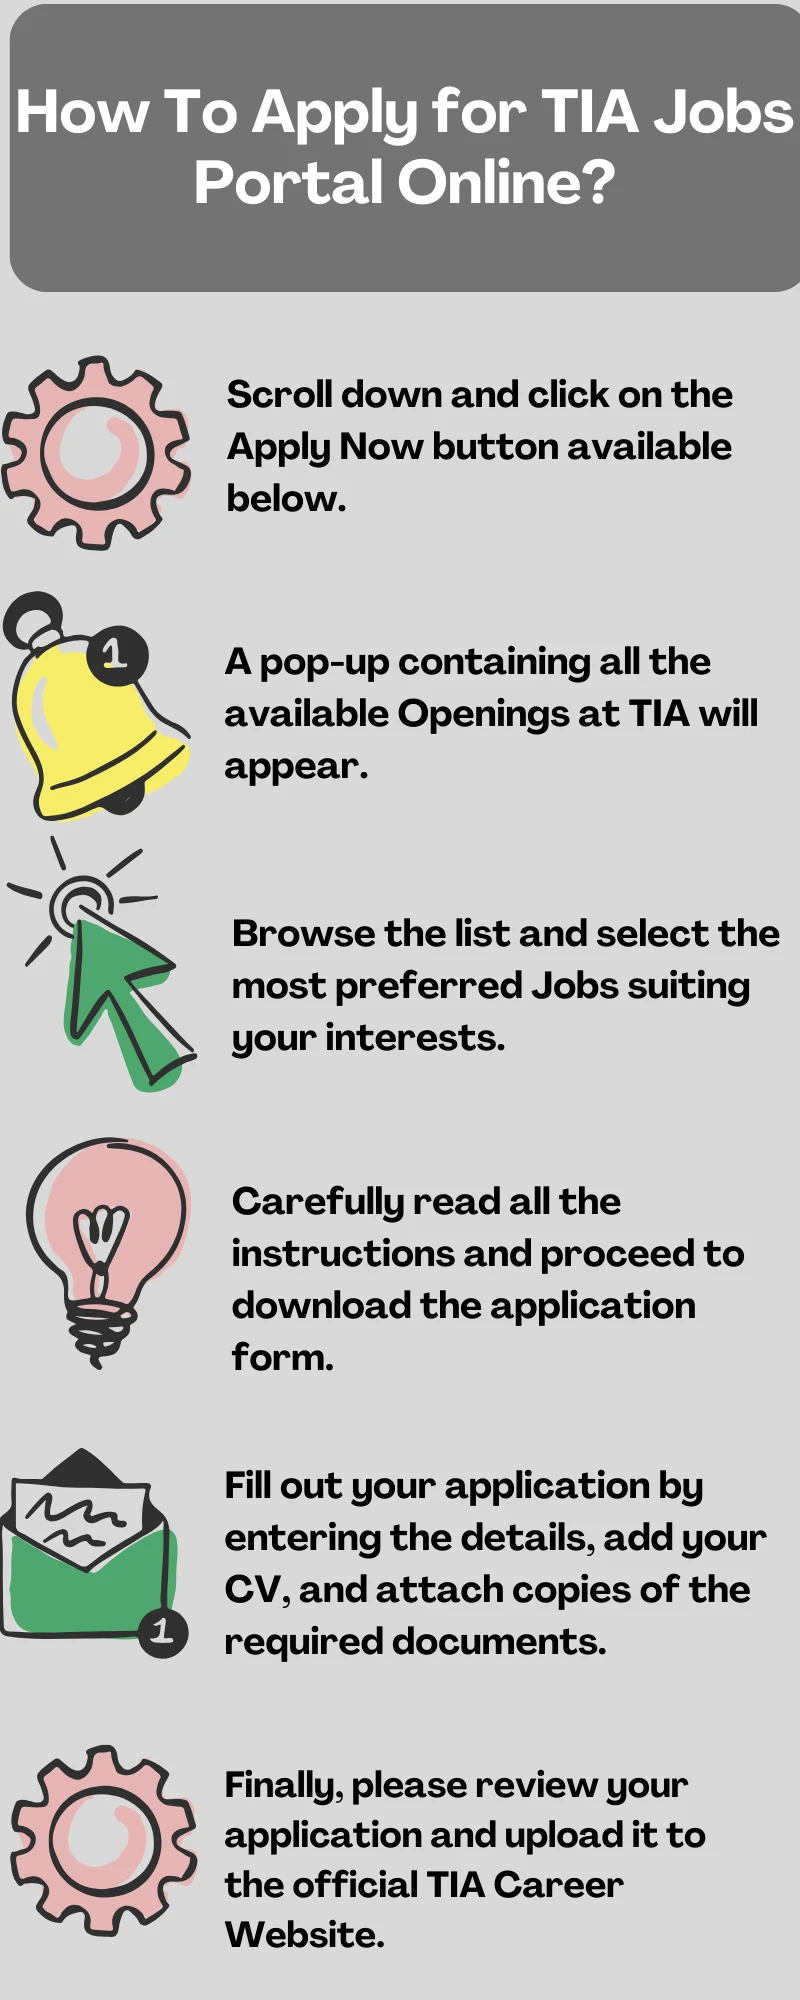 How To Apply for TIA Jobs Portal Online?